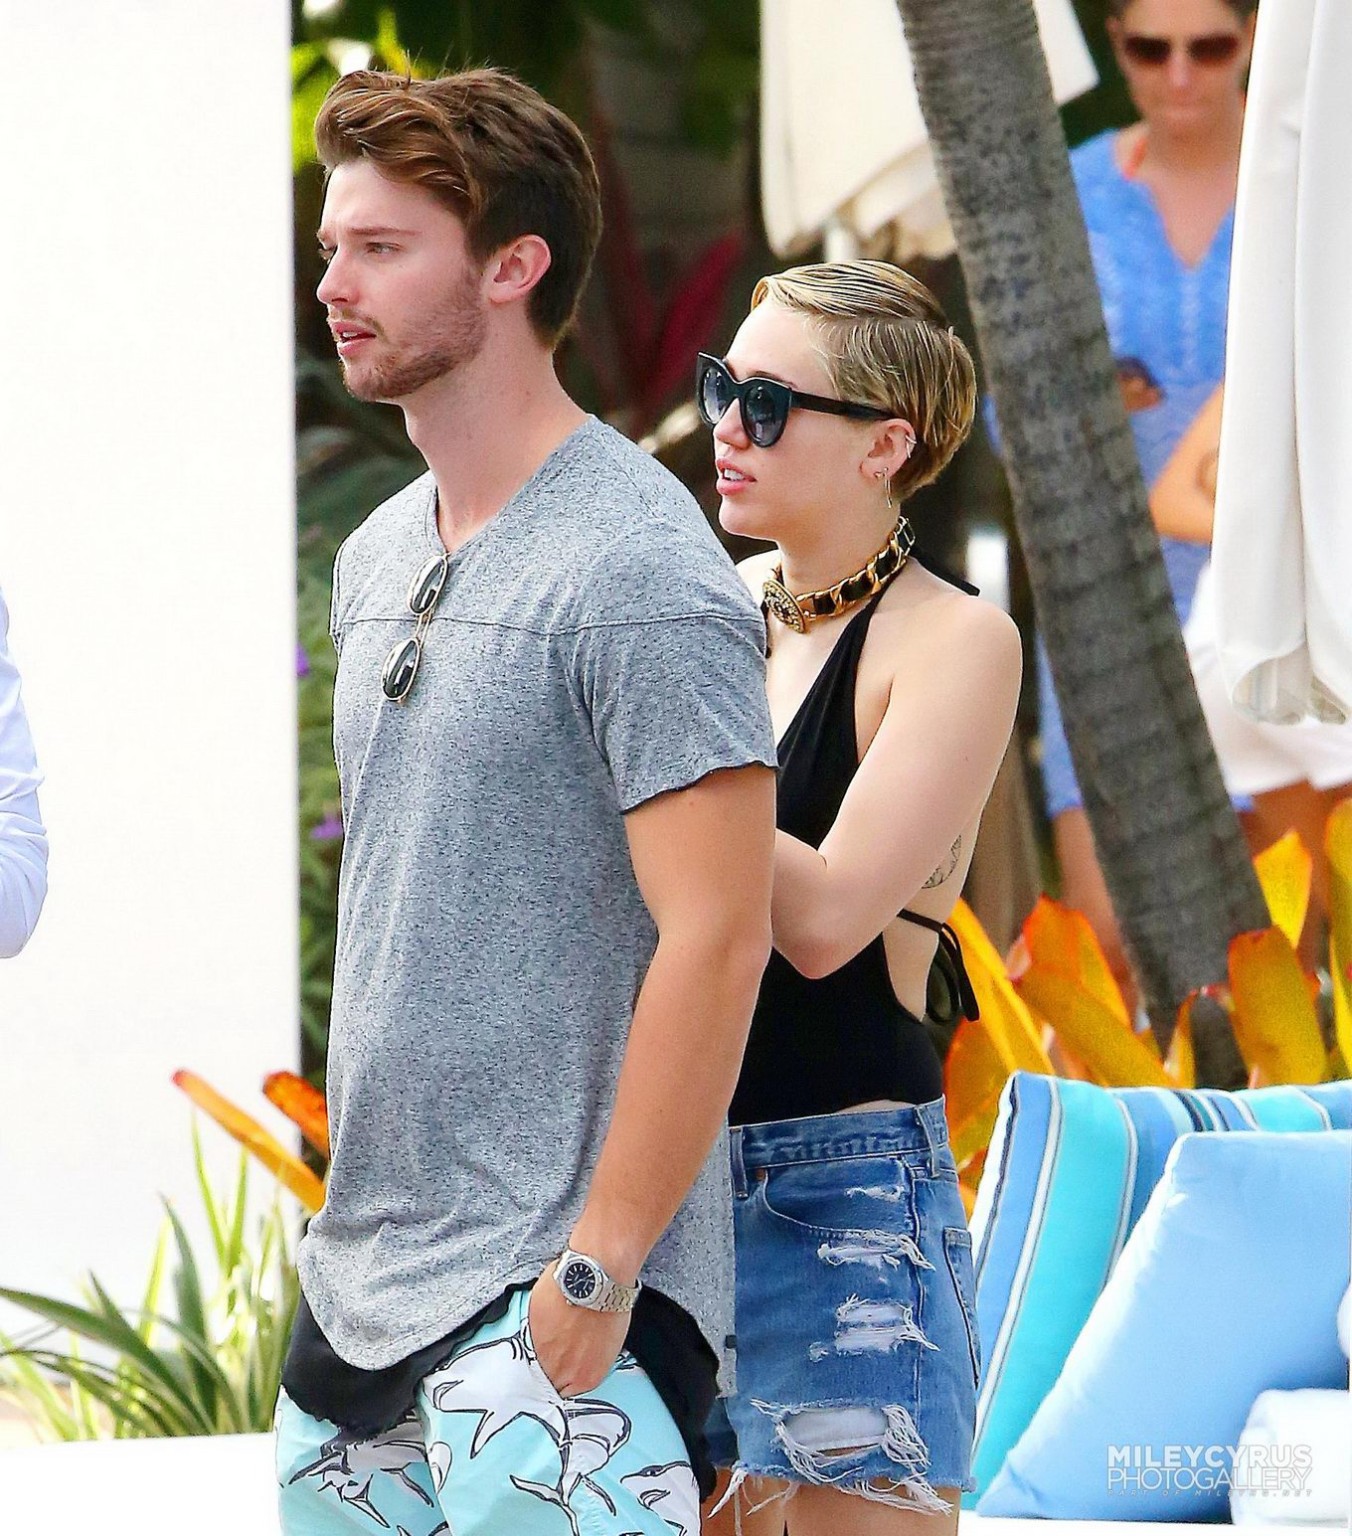 Miley Cyrus wearing swimsuit and hotpants at a pool in Miami #75178797